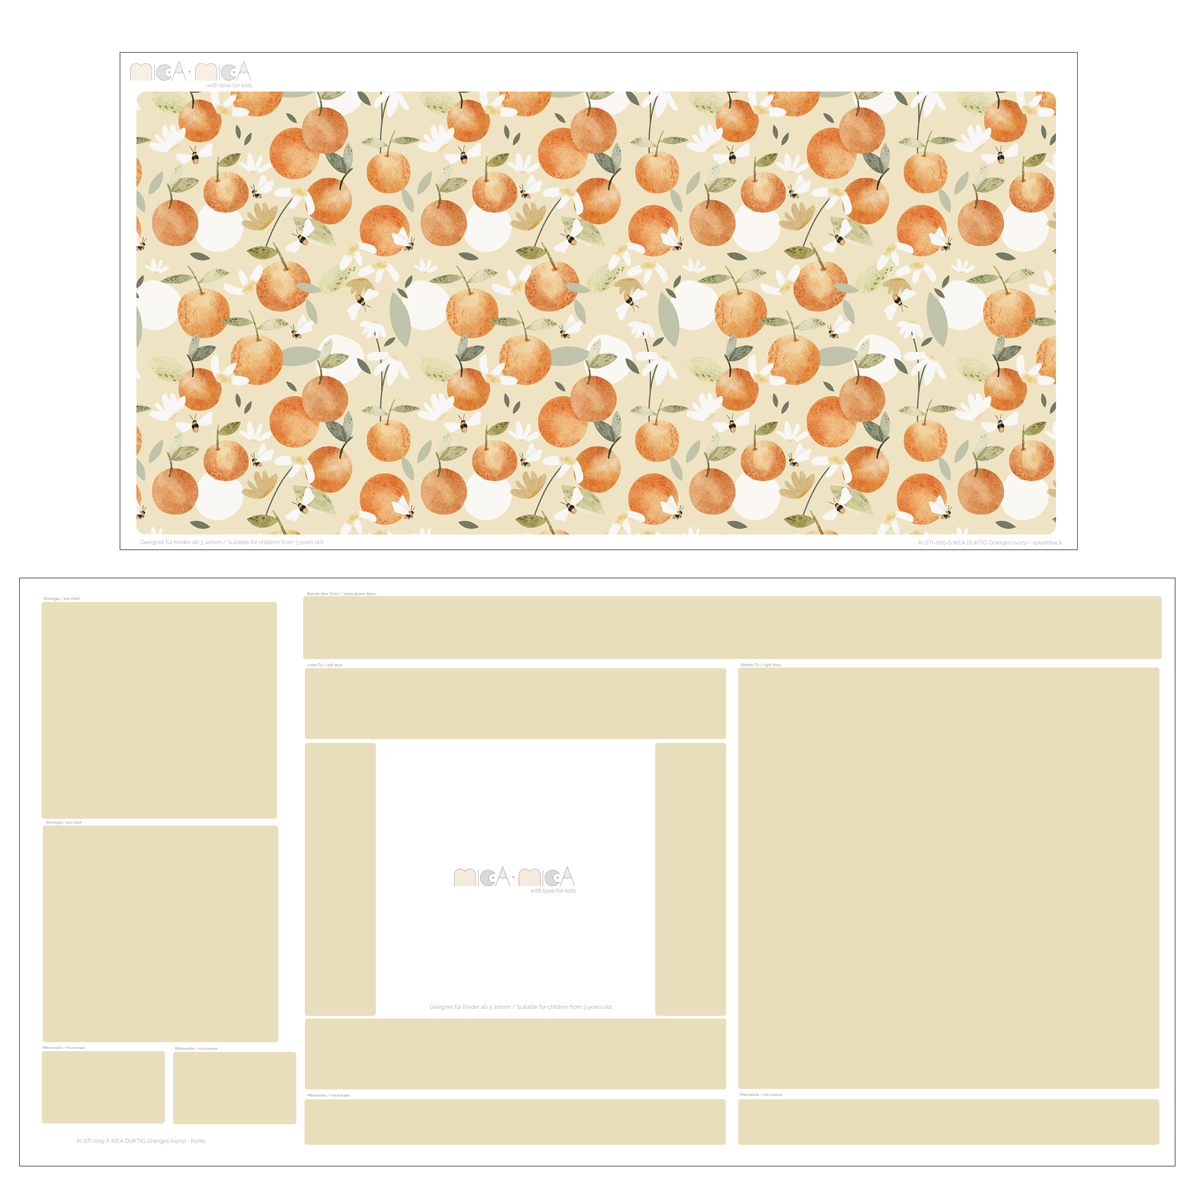 Sticker set for IKEA DUKTIG play kitchen - Oranges with bees (ivory)